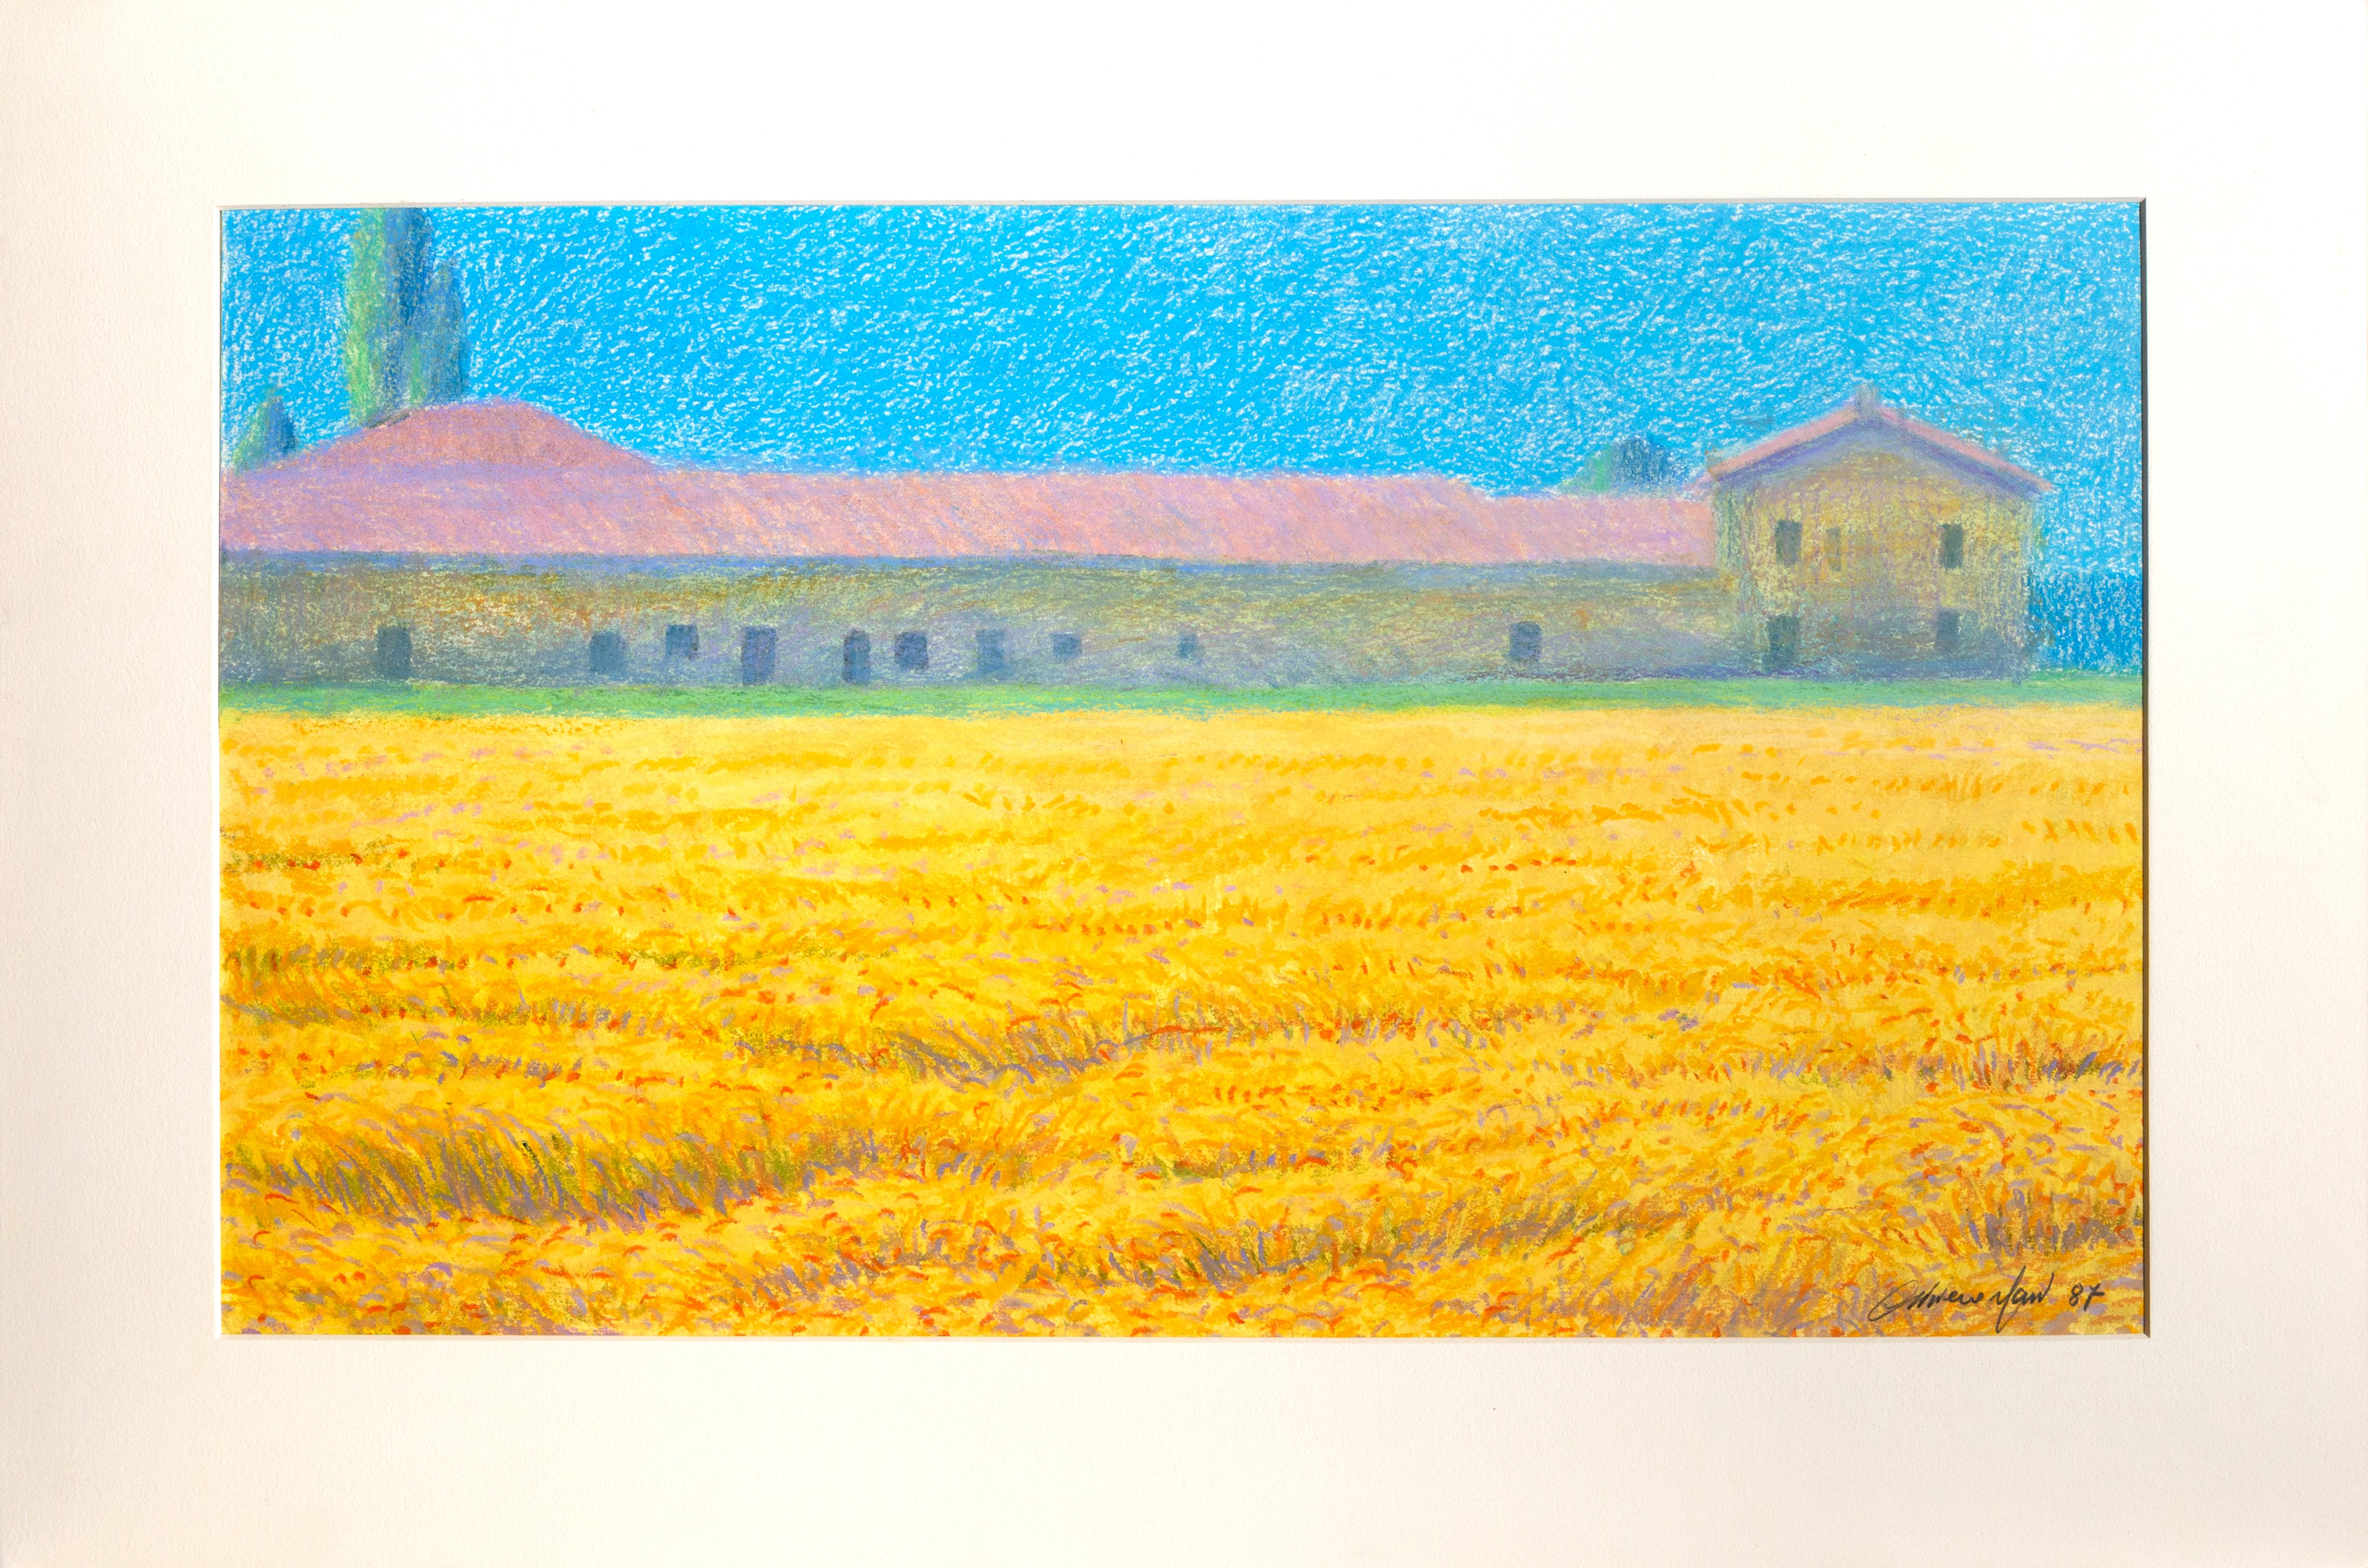 Wheat Field and House, Pastel Landscape - Art by Oliviero Masi